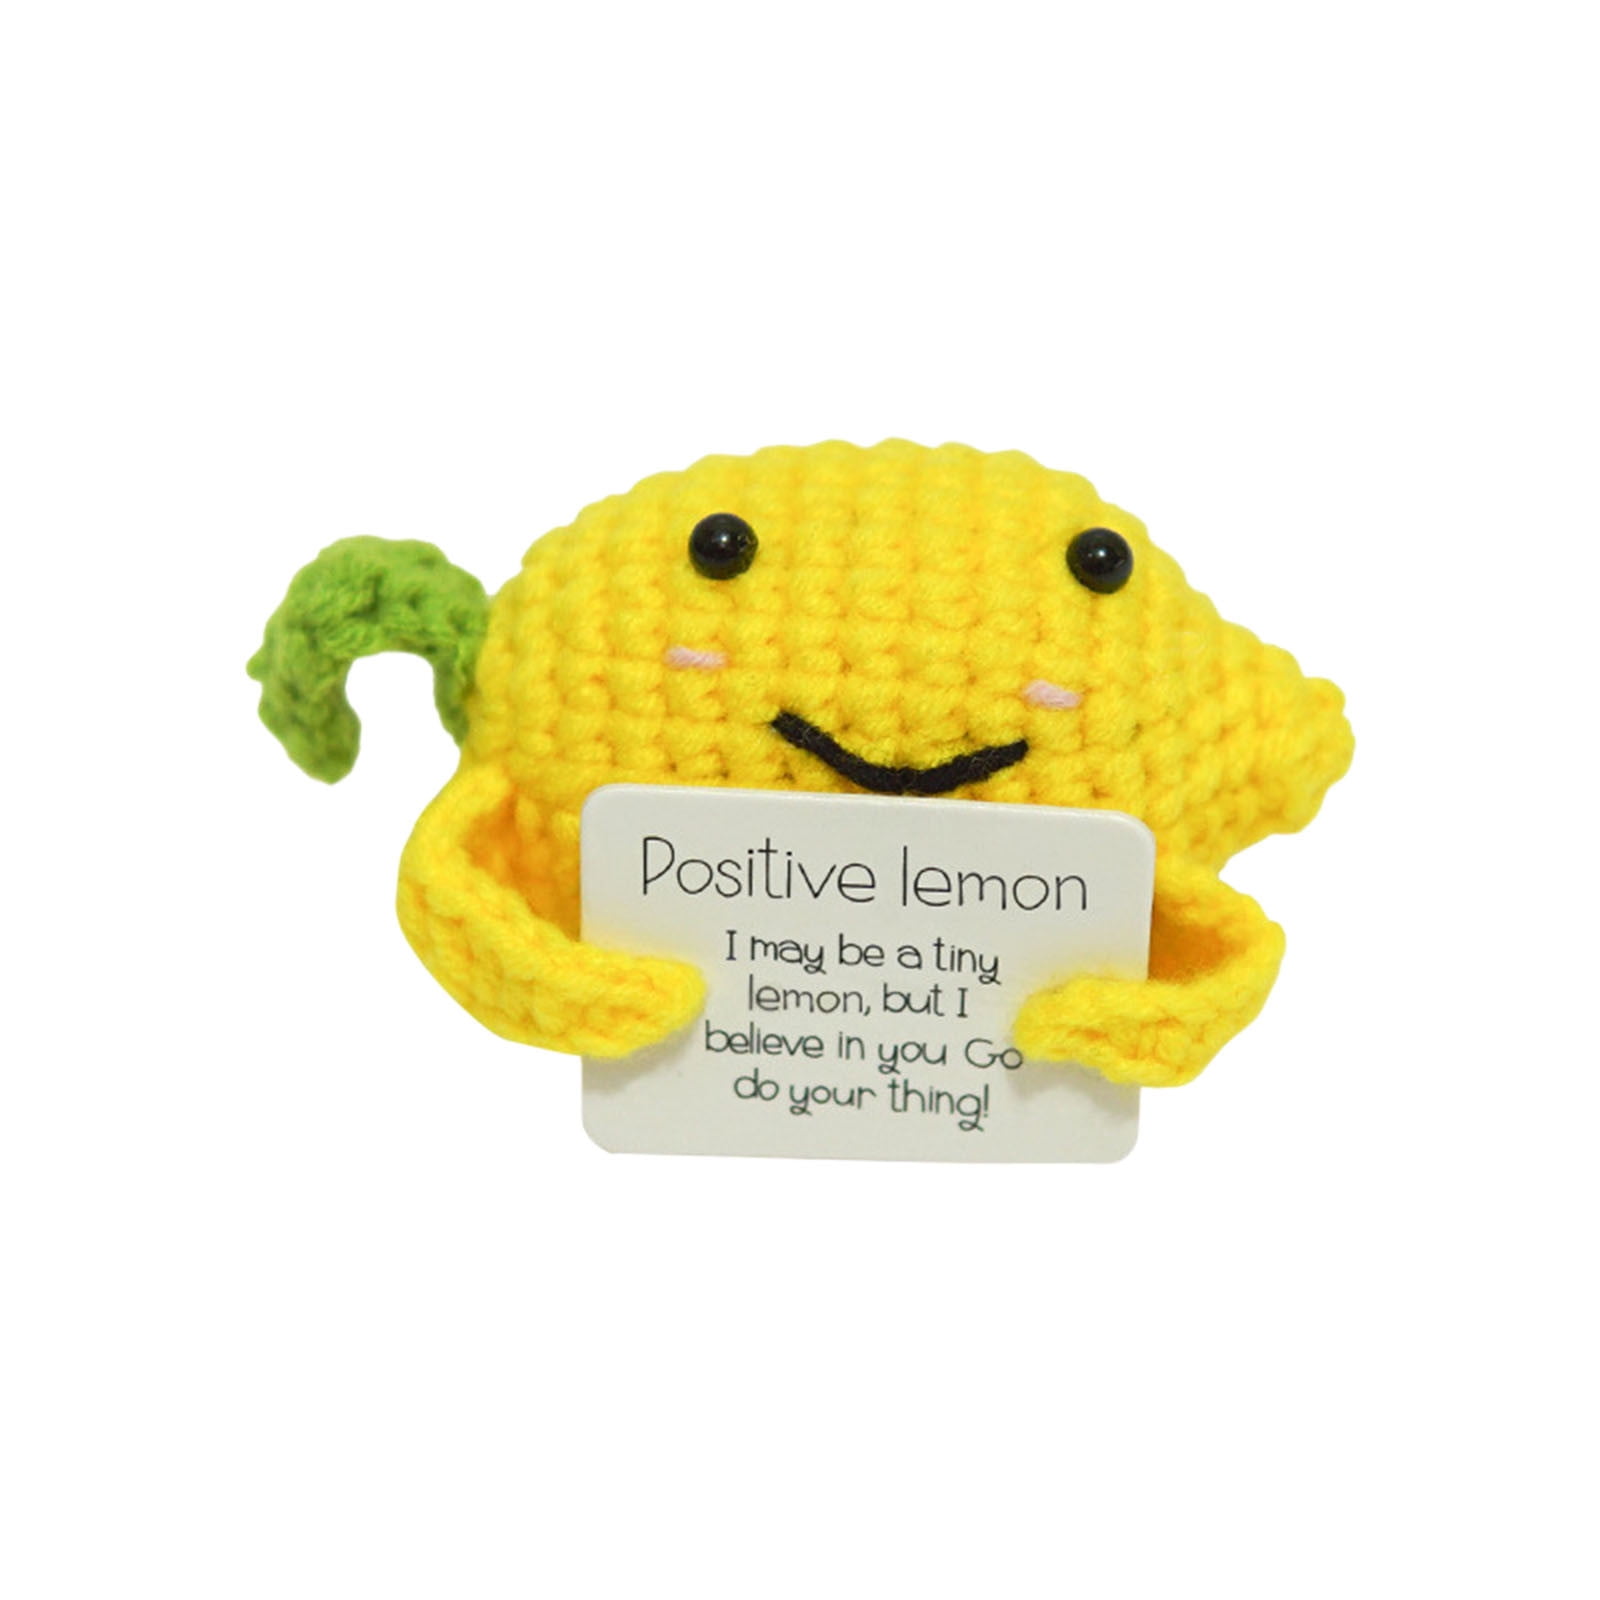 Handmade Emotional Support Pickle,Crochet Smiley Sour Cucumber,Knitted  Pickle With Positive Quote,Cheer Up Gift,Crochet Decor (Pickle With Base) 